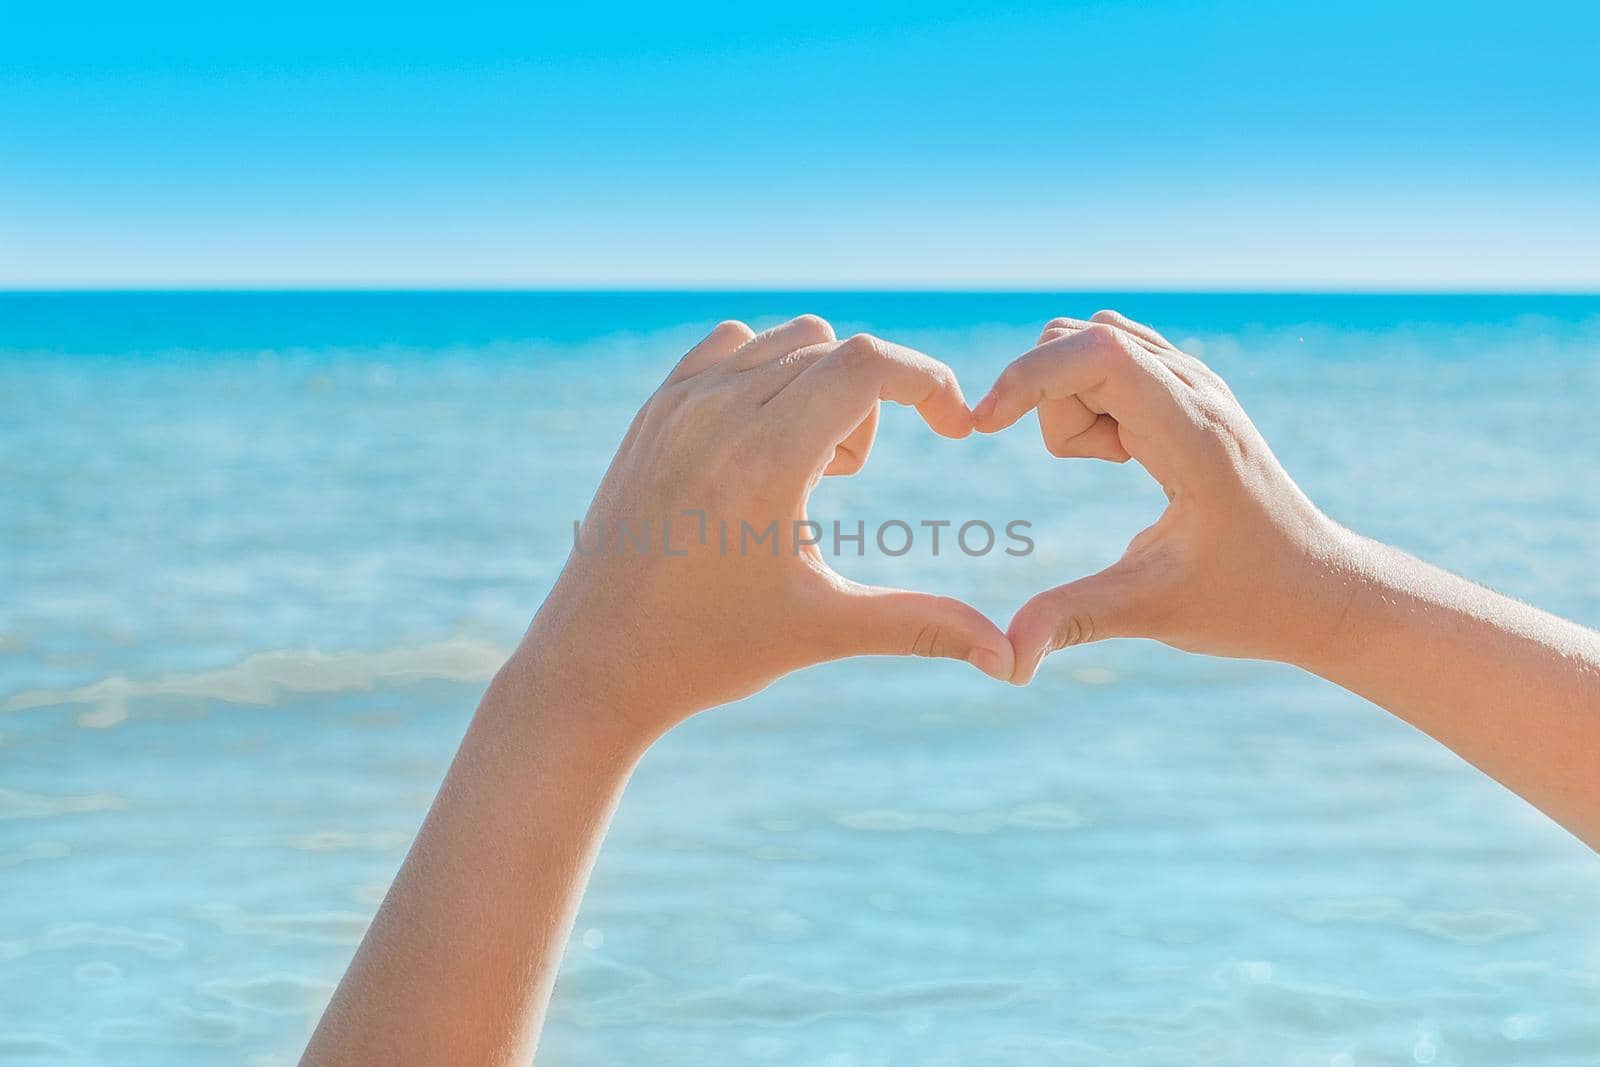 The hands of a young girl show a gesture of heart and love for the sea, rest and freedom.